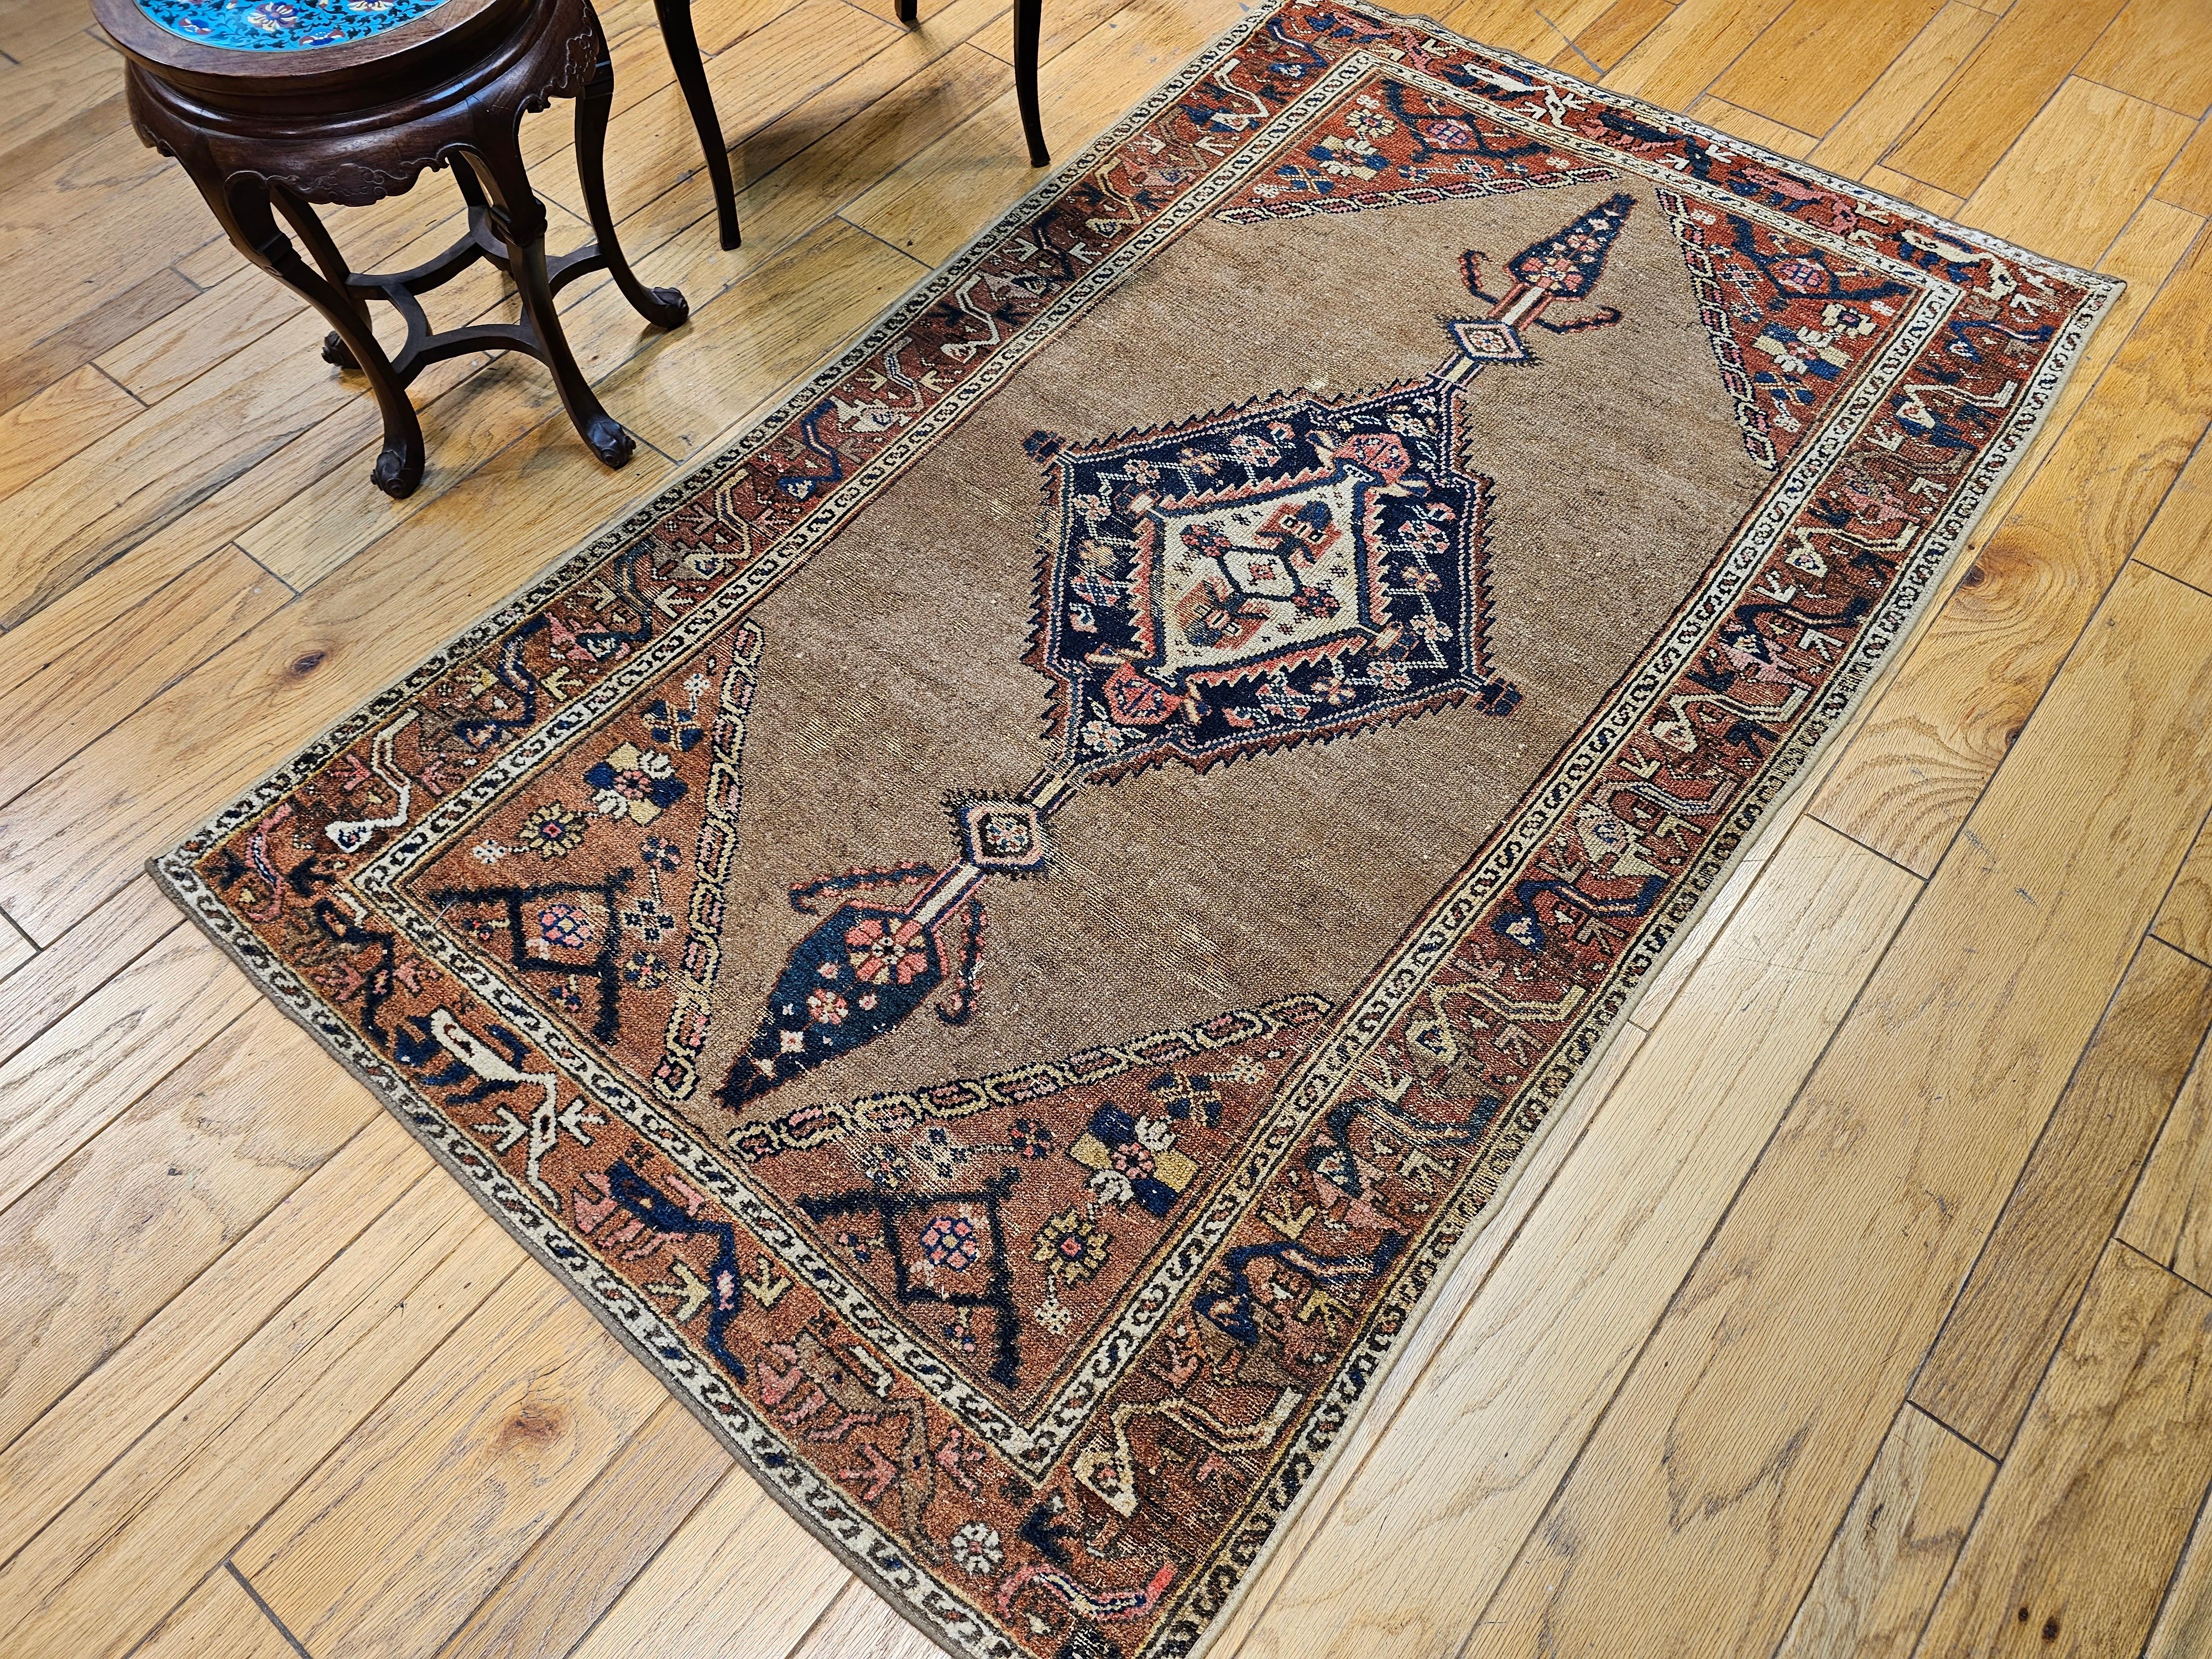 Vintage Persian Camelhair Malayer Area Rug in Camel, Navy, Ivory, Rust Red, Blue For Sale 12